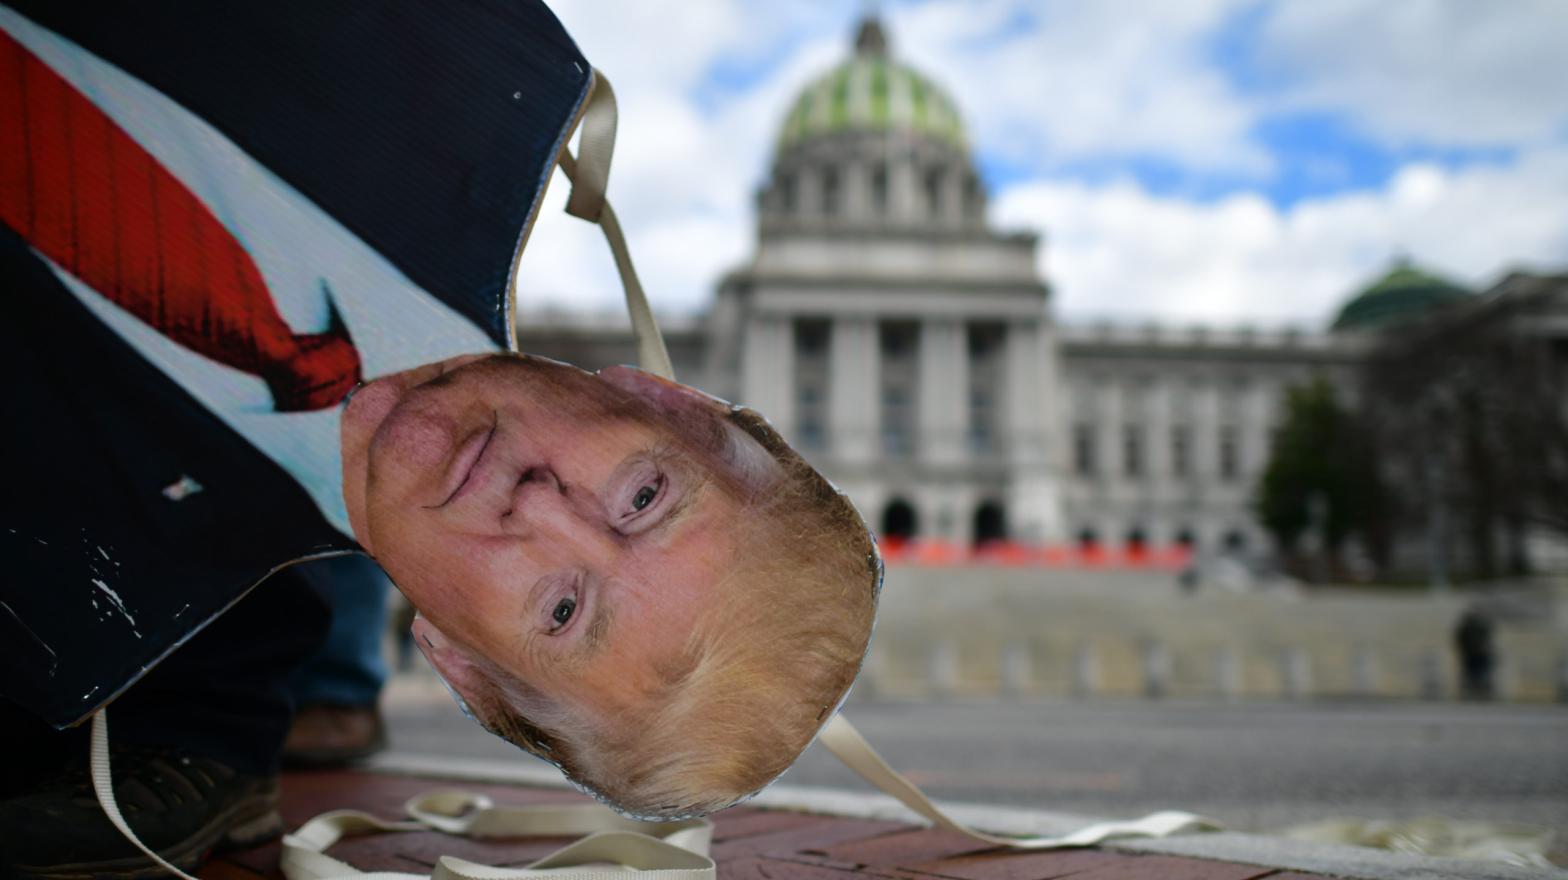 An effigy of Donald Trump held by anti-Trump protesters outside the  Capitol Building on Jan. 17, 2021 (Photo: Mark Makela, Getty Images)